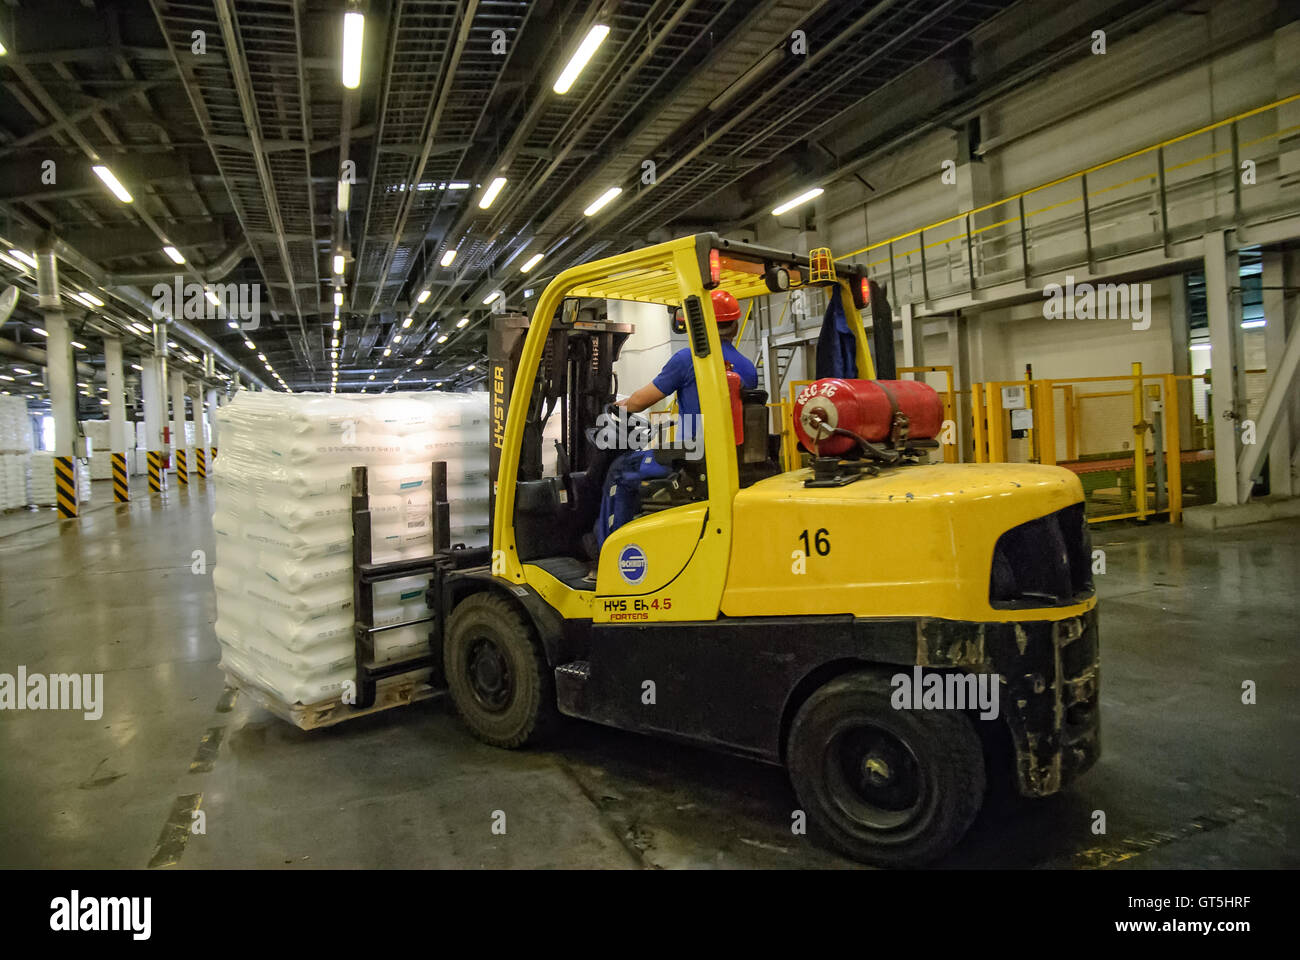 Forklift truck loads pallets with finished goods Stock Photo